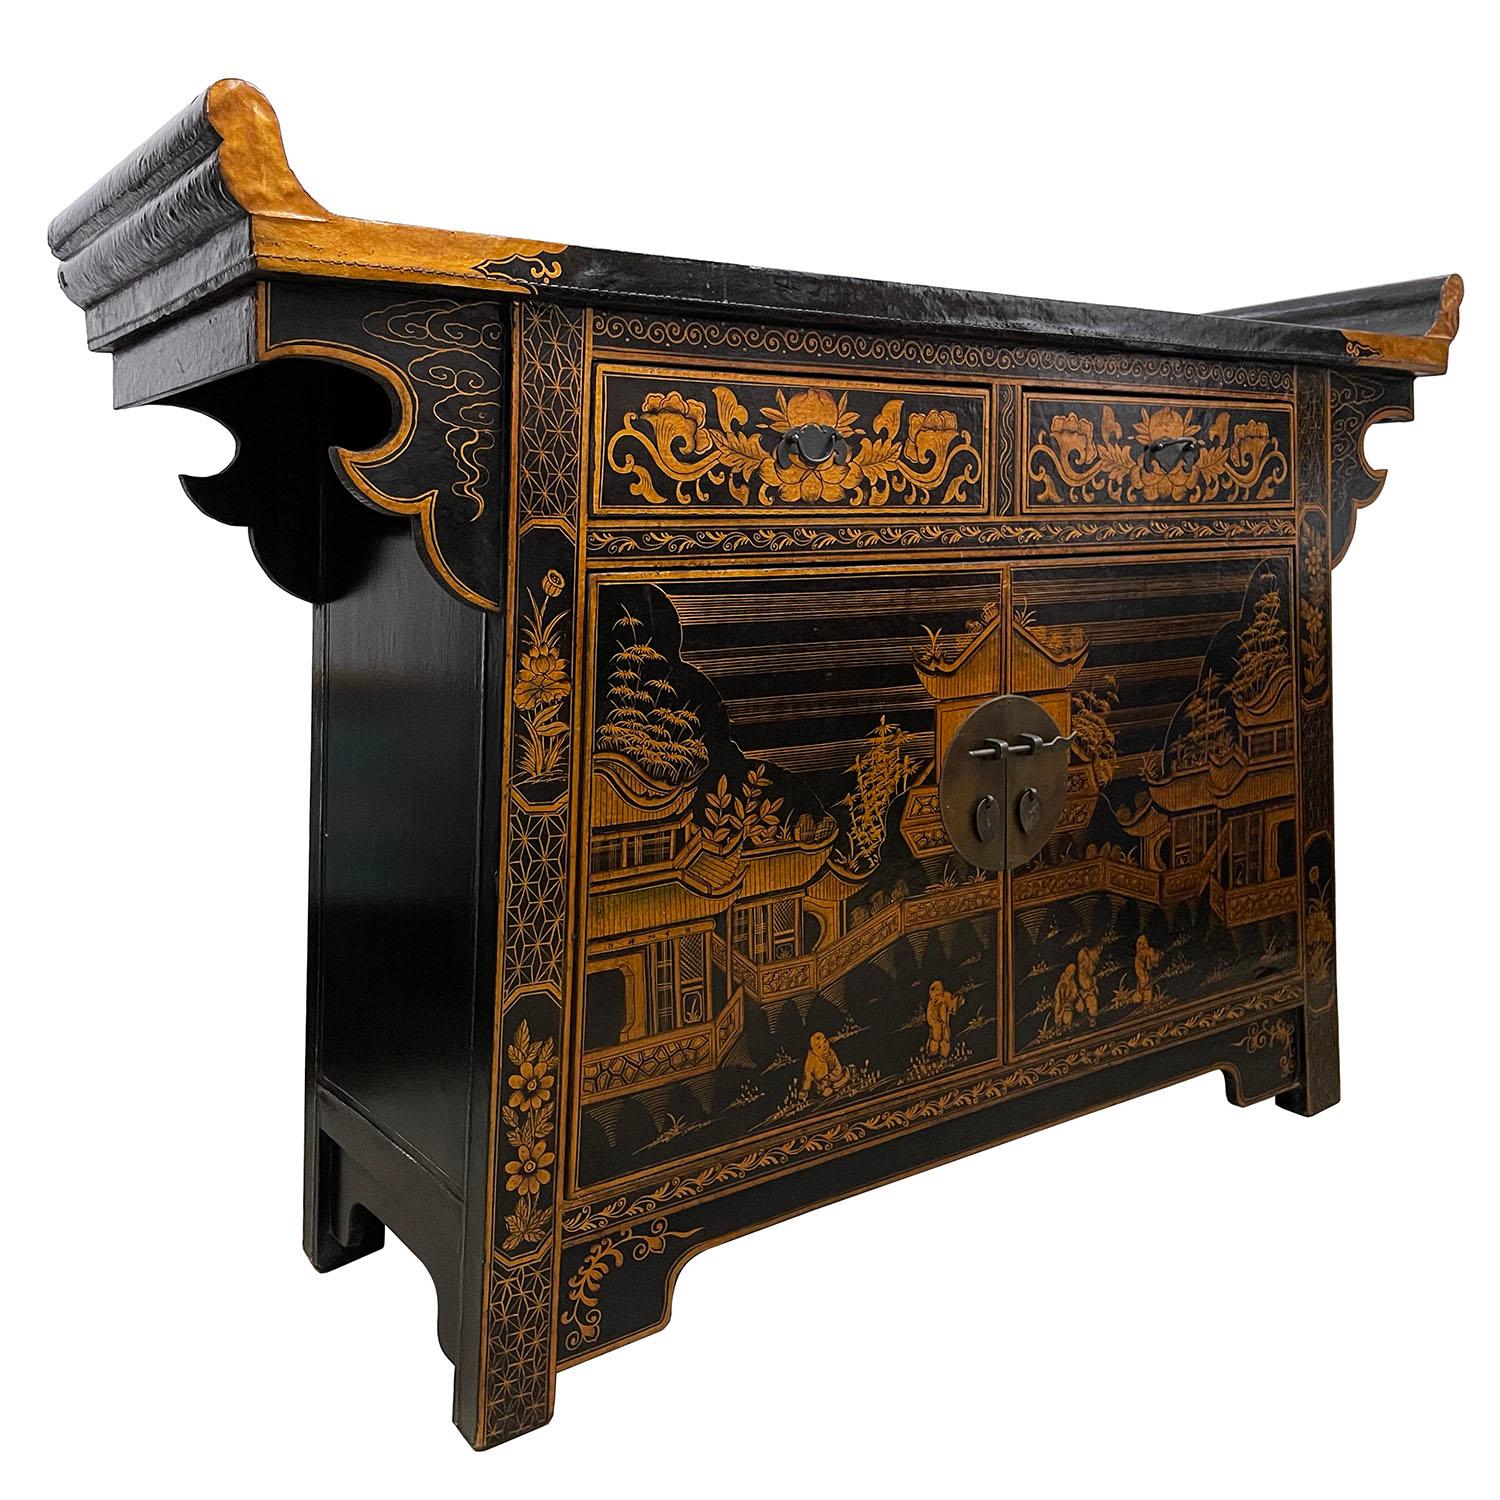 Size: 37.5in H x 59in W x 19in D
Drawer: 3.5in H x 15.5in W x 14in D
Door opening: 20.5in H x 33in W
Origin: China
Circa: 1900 - 1940
Material: Wood, lacquer painting
Condition: Original finished, solid wood construction, sturdy, normal age